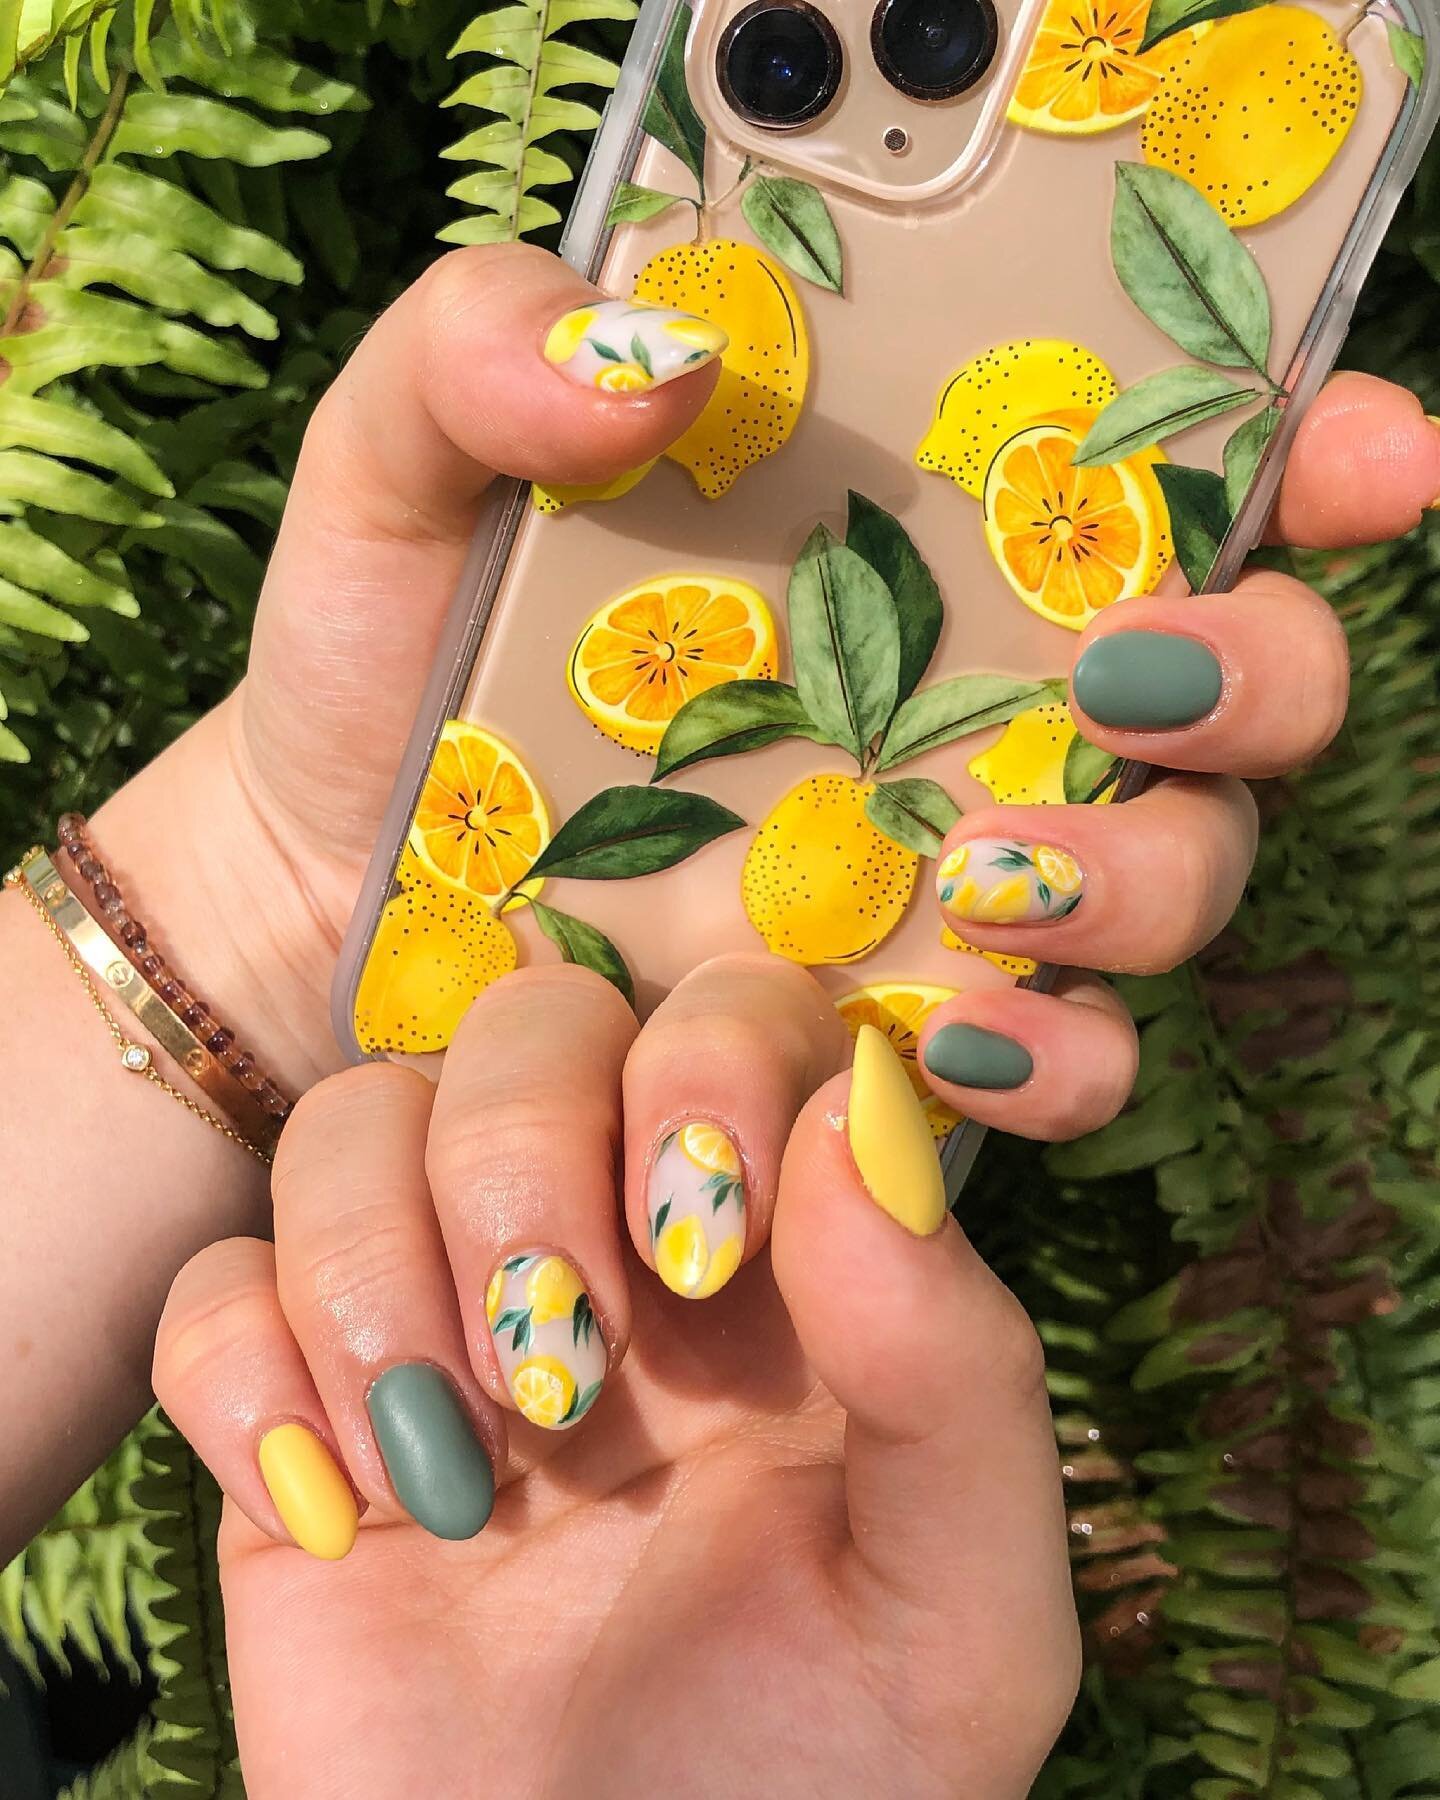 🍋 Freshly squeezed, freshly hand painted, freshly Tinted. ﻿
﻿
💅🏻 Done by our Nail Artist Nana﻿
﻿
📲 Whatsapp us through the link in bio or click the Book Now button to reserve your slot!﻿
﻿
#FreshlyTinted﻿
﻿
#lemonnails #summernails #nailitdaily #